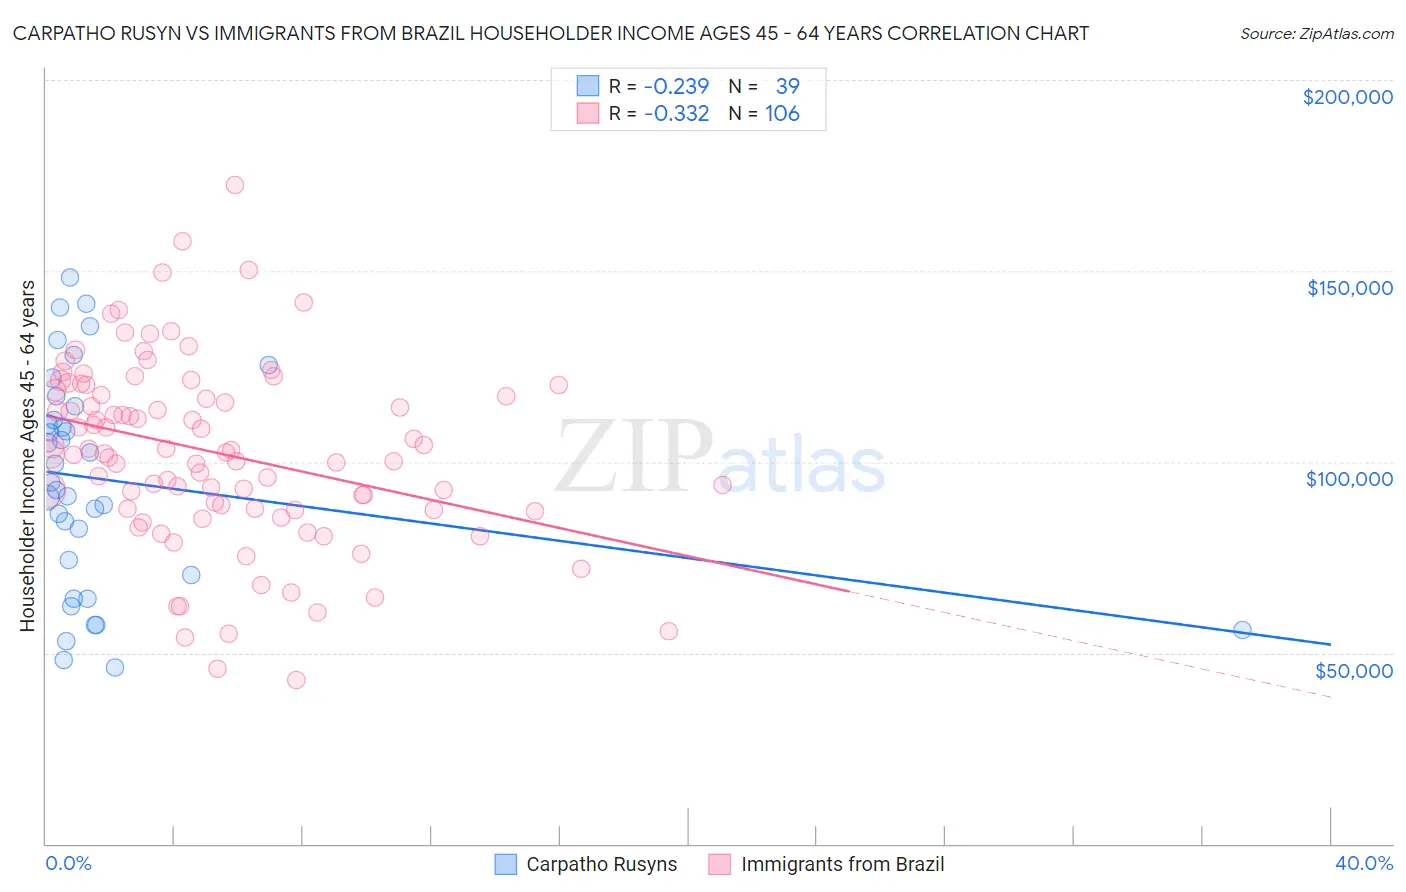 Carpatho Rusyn vs Immigrants from Brazil Householder Income Ages 45 - 64 years